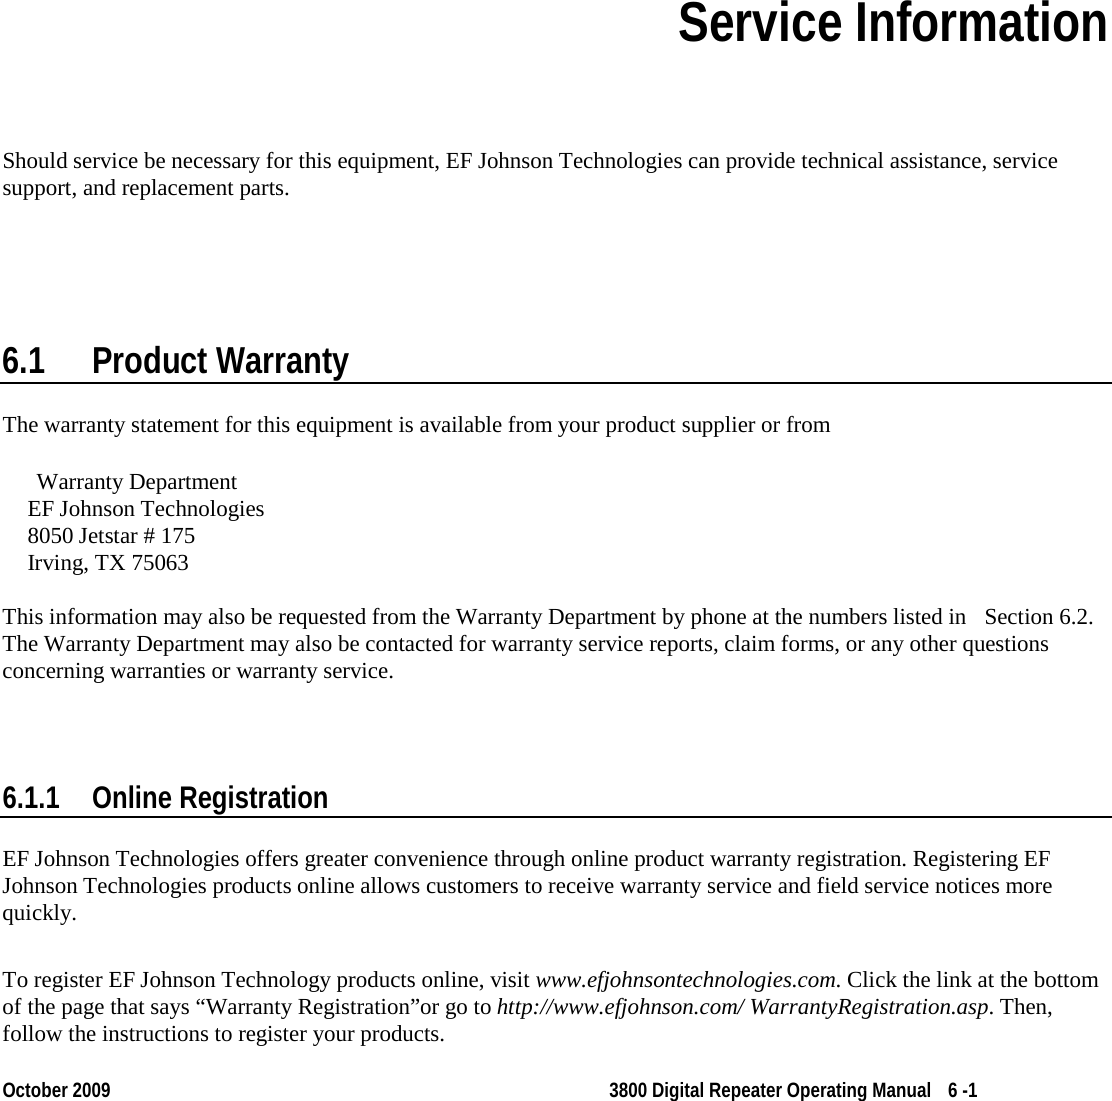  October 2009 3800 Digital Repeater Operating Manual 6 -1 Section 6 Section 6Service Information Should service be necessary for this equipment, EF Johnson Technologies can provide technical assistance, service support, and replacement parts. 6.1 Product Warranty The warranty statement for this equipment is available from your product supplier or from  Warranty Department EF Johnson Technologies  8050 Jetstar # 175 Irving, TX 75063  This information may also be requested from the Warranty Department by phone at the numbers listed in  Section 6.2. The Warranty Department may also be contacted for warranty service reports, claim forms, or any other questions concerning warranties or warranty service. 6.1.1 Online Registration EF Johnson Technologies offers greater convenience through online product warranty registration. Registering EF Johnson Technologies products online allows customers to receive warranty service and field service notices more quickly. To register EF Johnson Technology products online, visit www.efjohnsontechnologies.com. Click the link at the bottom of the page that says “Warranty Registration”or go to http://www.efjohnson.com/ WarrantyRegistration.asp. Then, follow the instructions to register your products. 